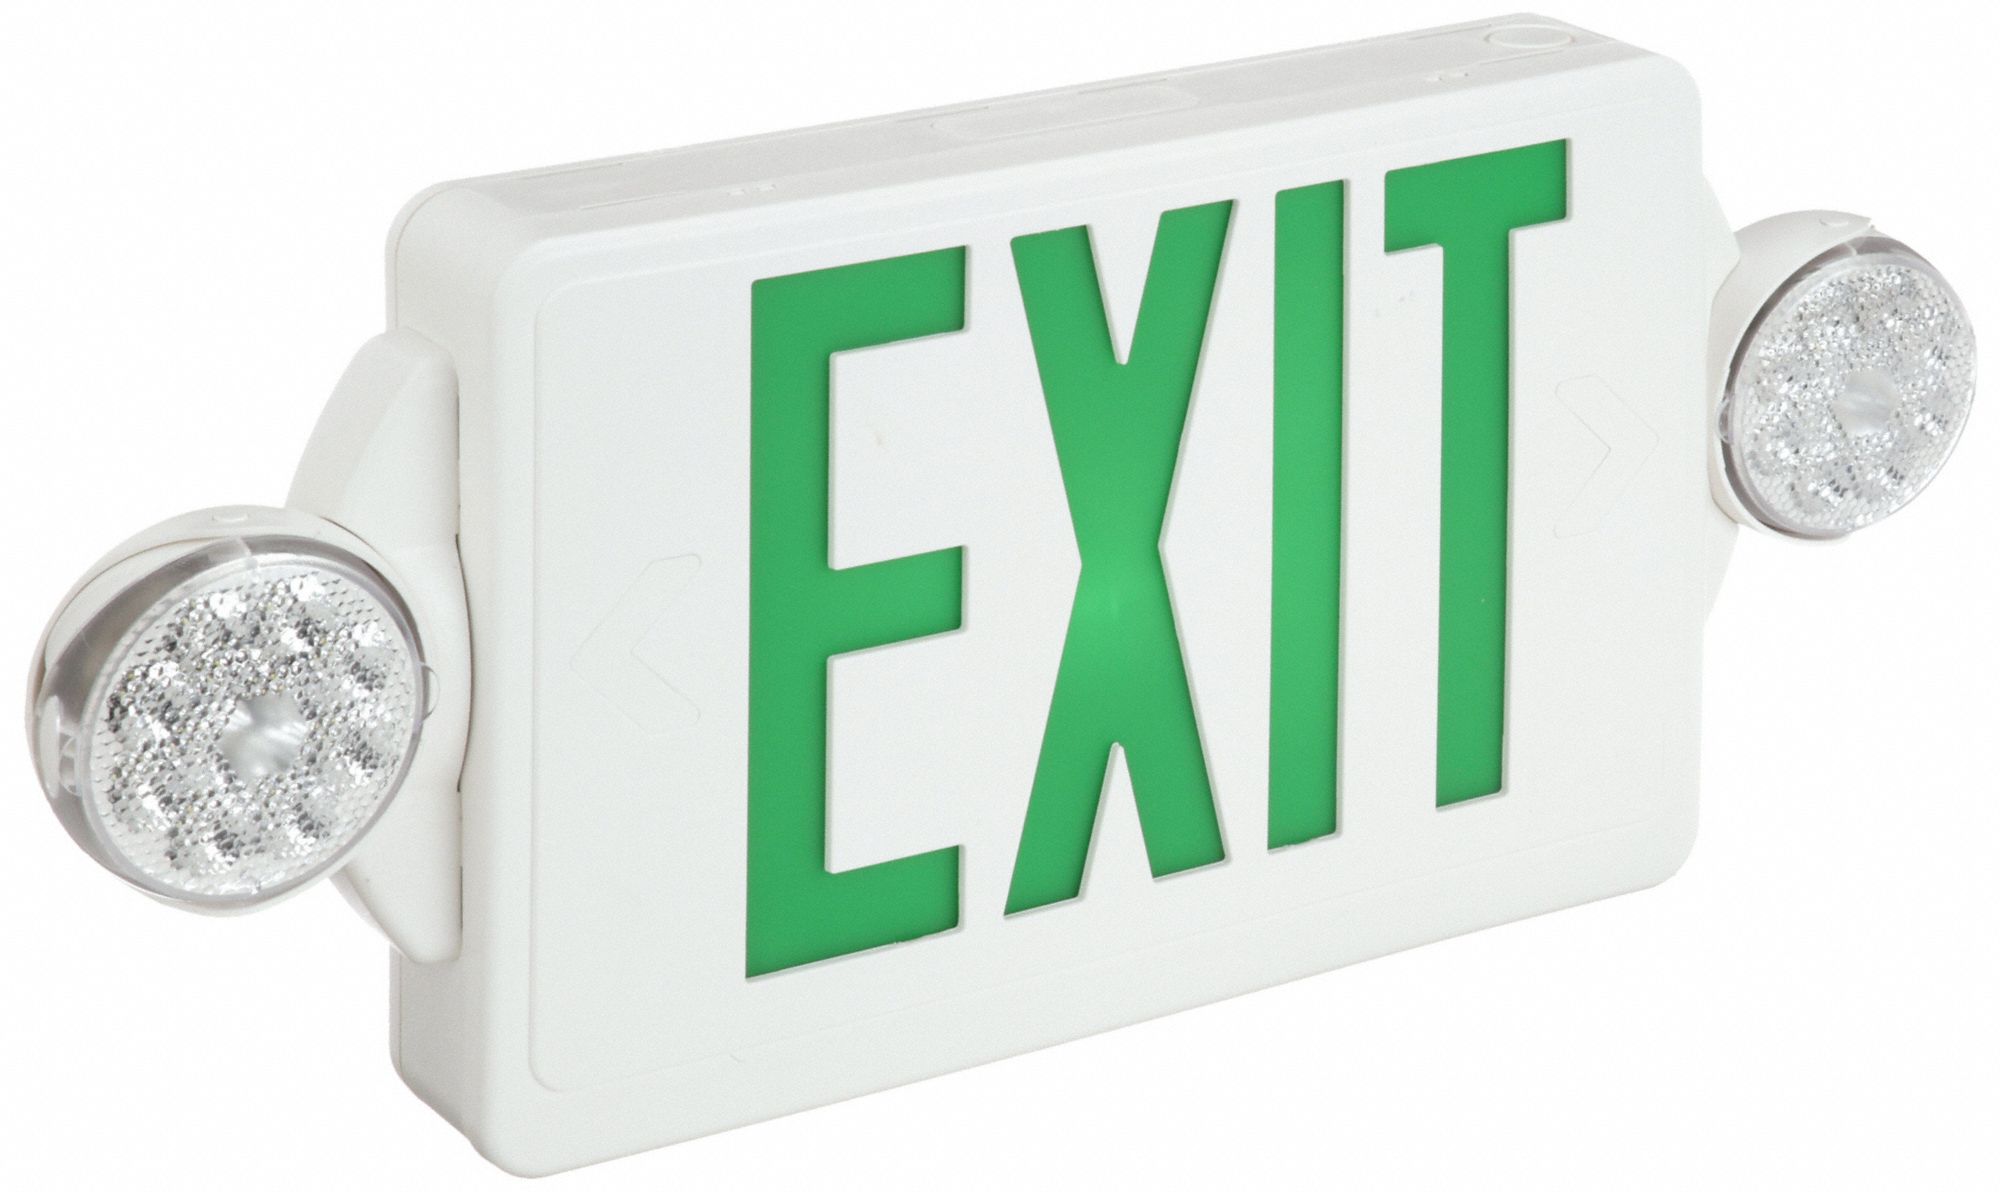 White, 2 Faces, Exit Sign With Emergency Lights - 4zda8